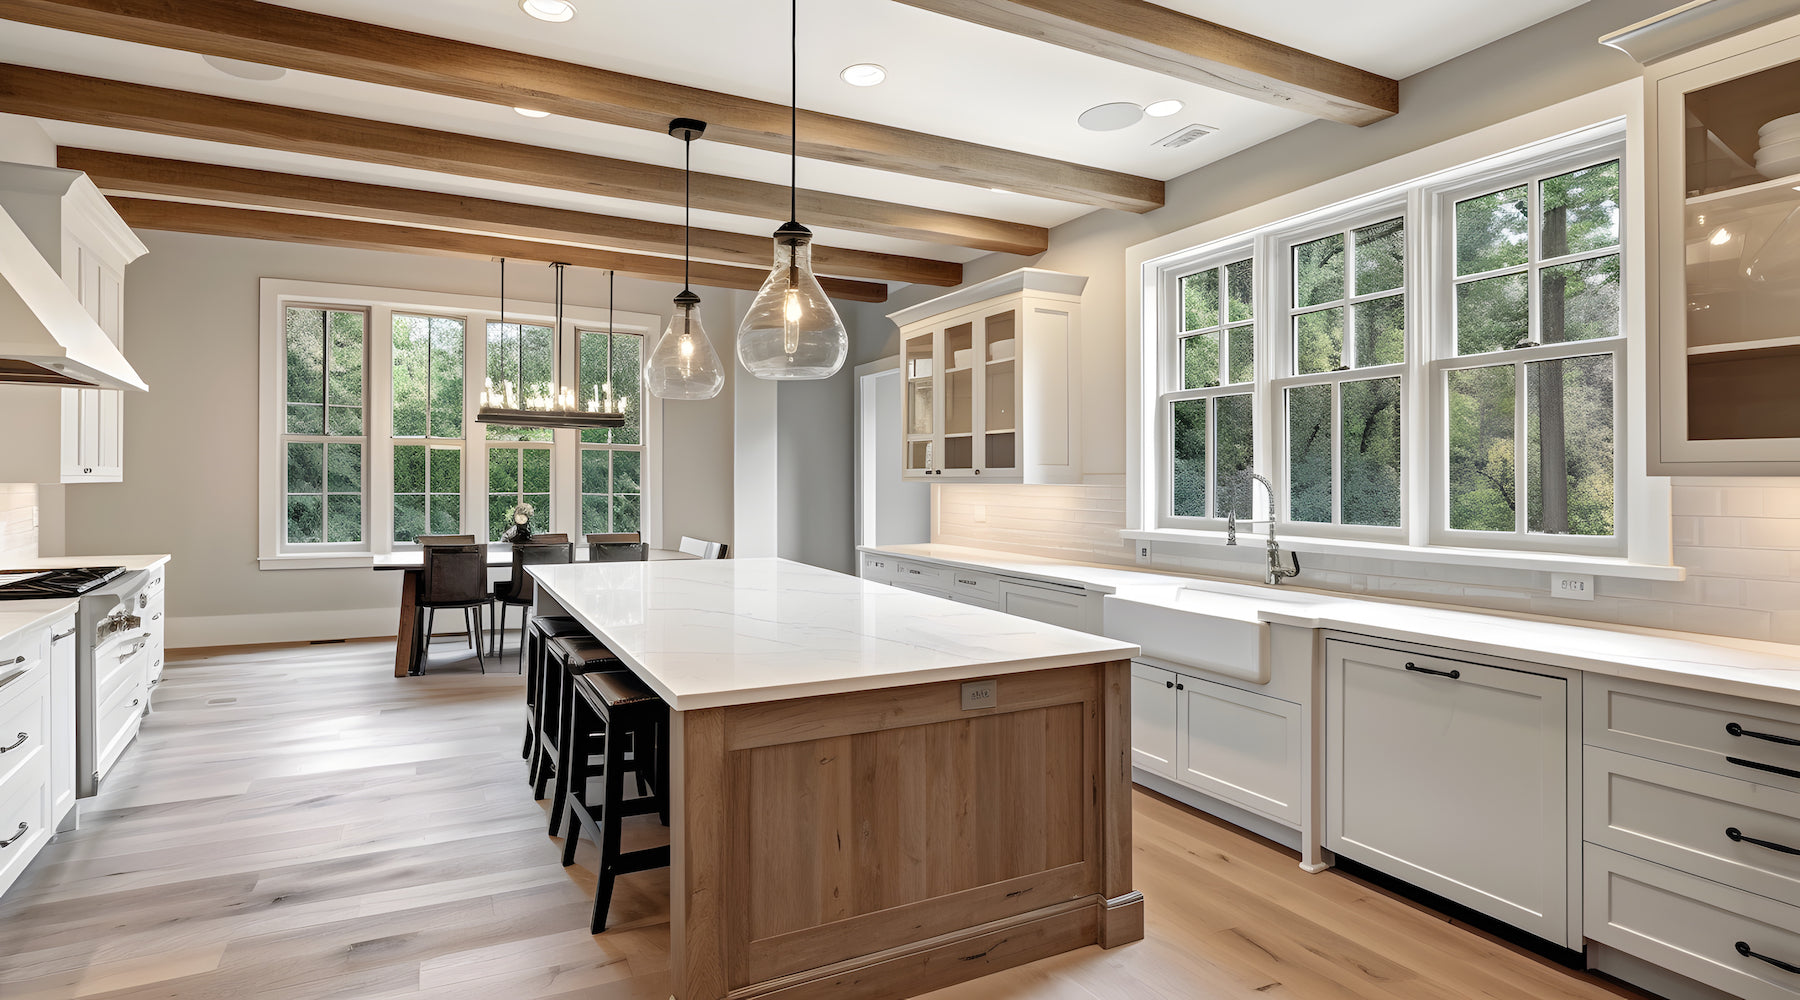 Pendant lights hanging over island in modern farmhouse style kitchen